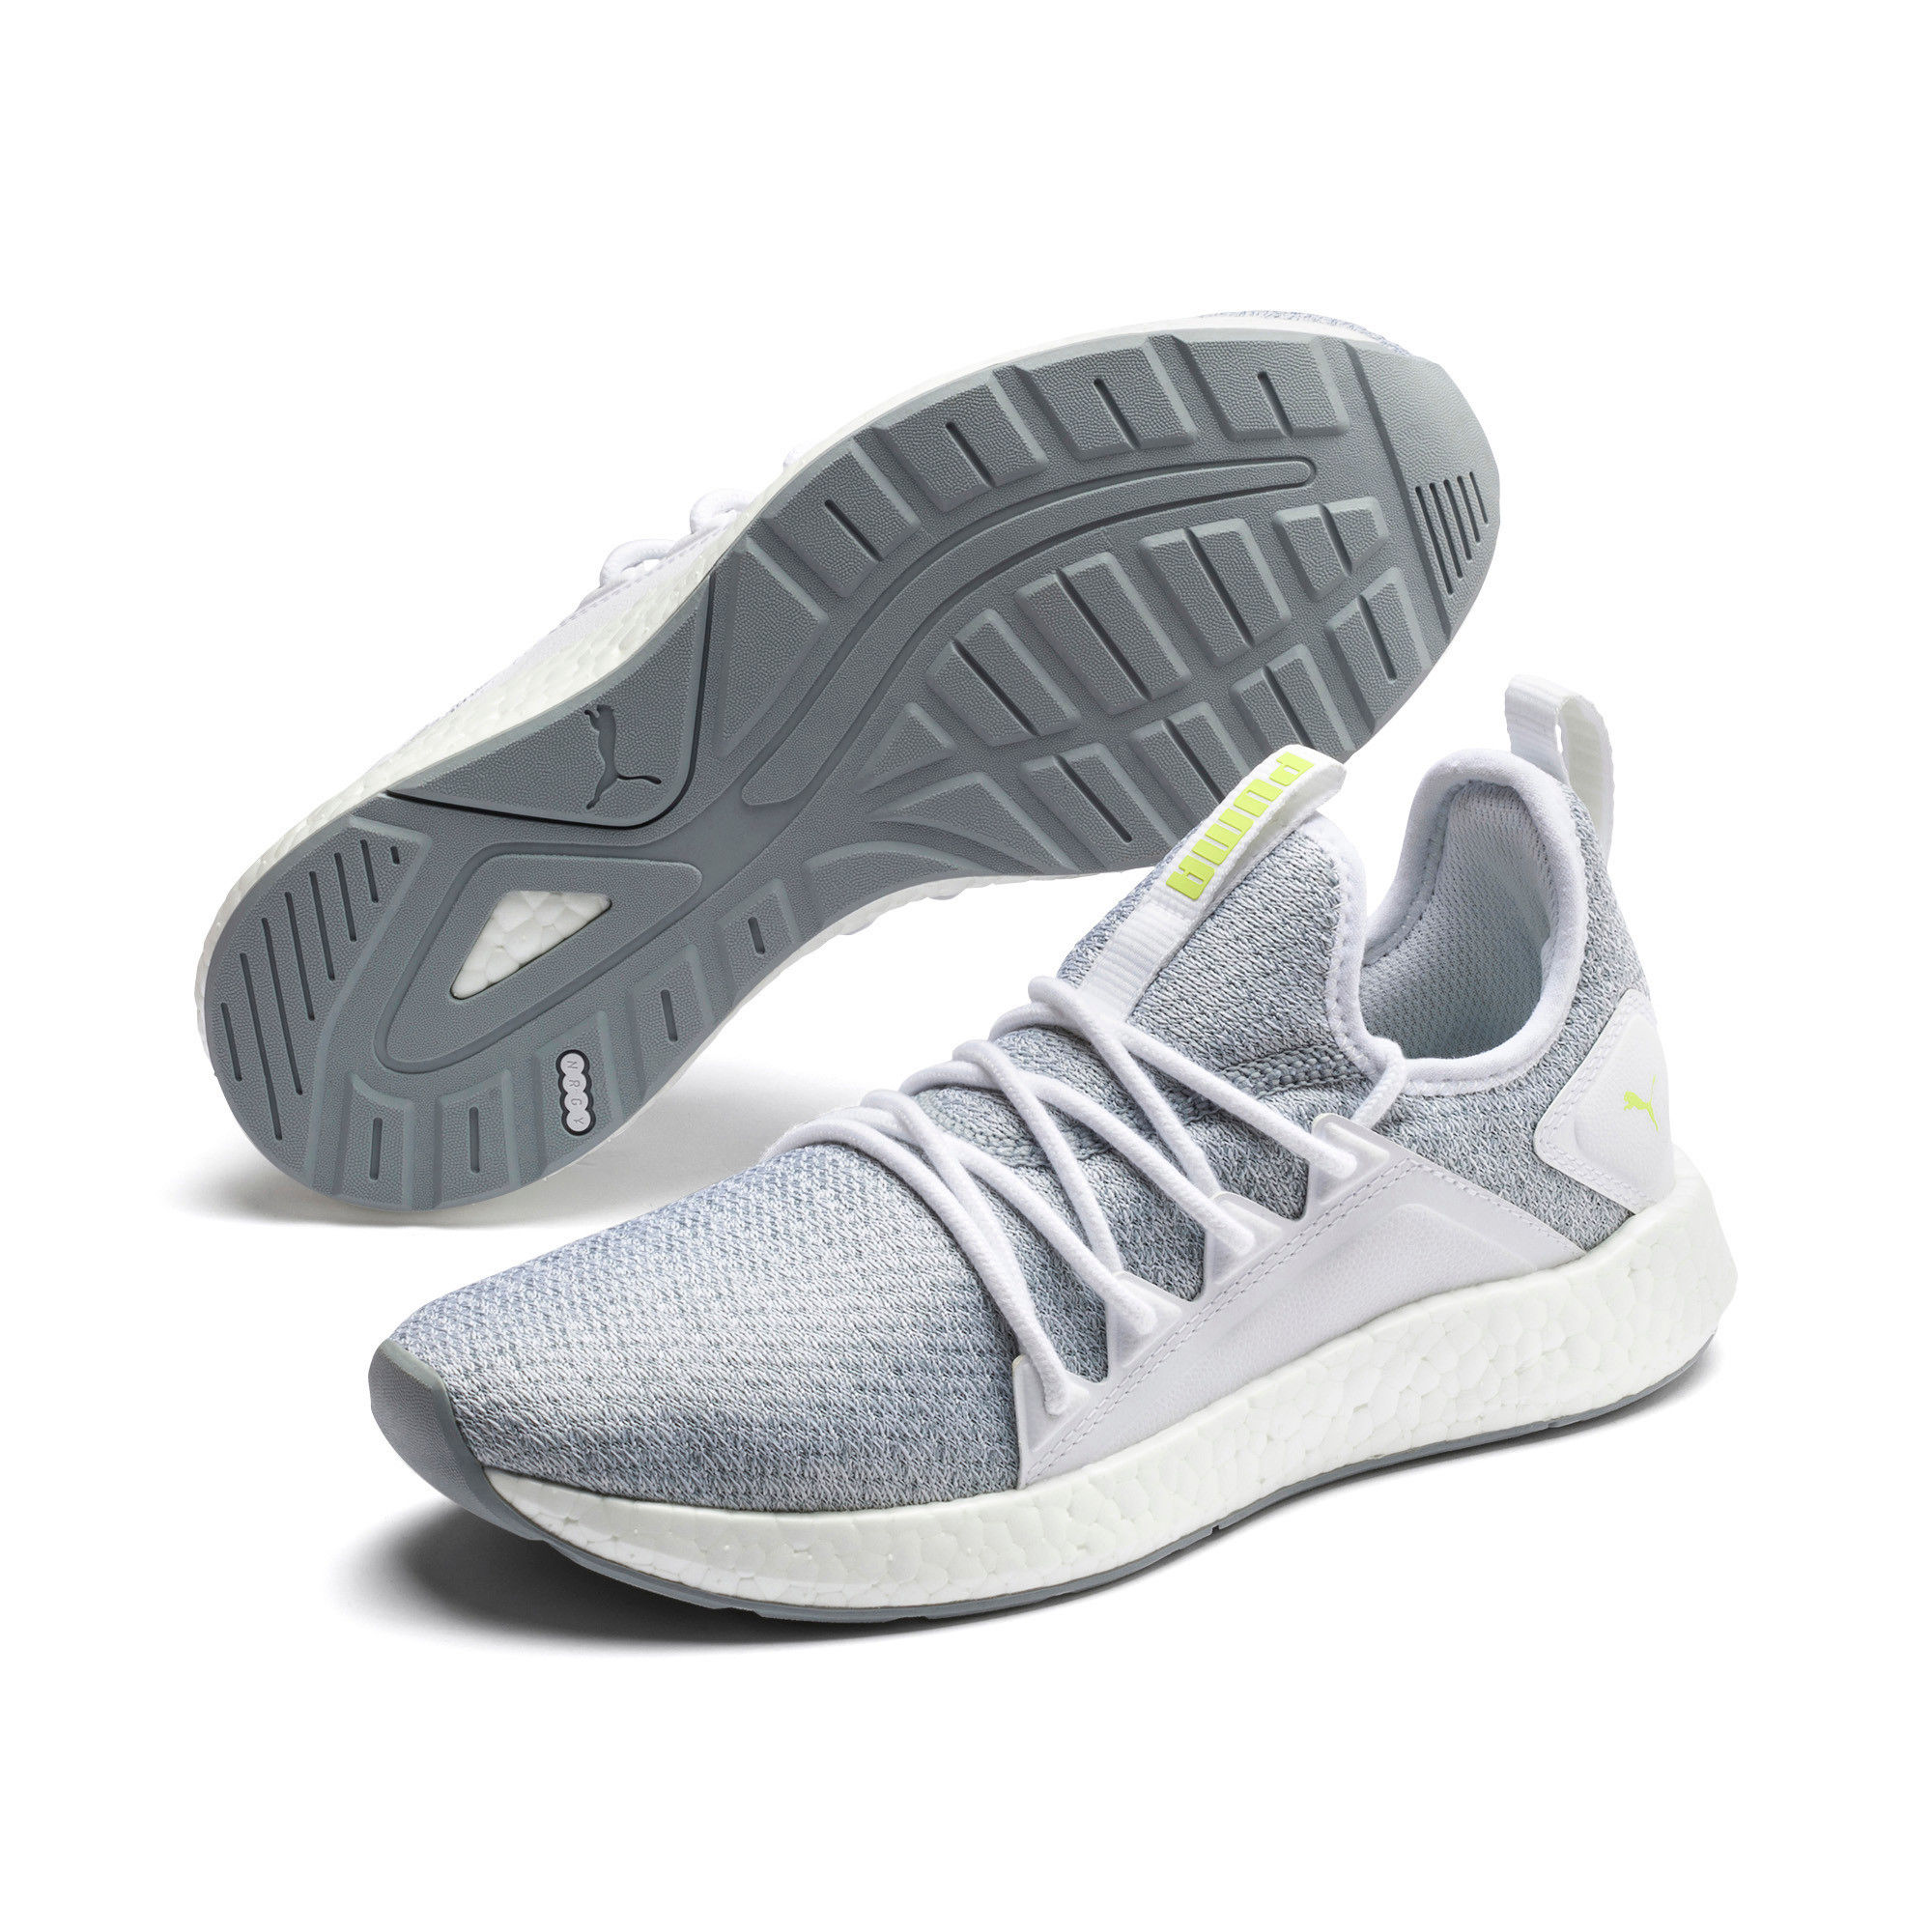 Puma NRGY Neko Knit Women's Running Shoes - White (7): Buy Puma NRGY Neko Knit Women's Running Shoes - White (7) Online at Best Price in India